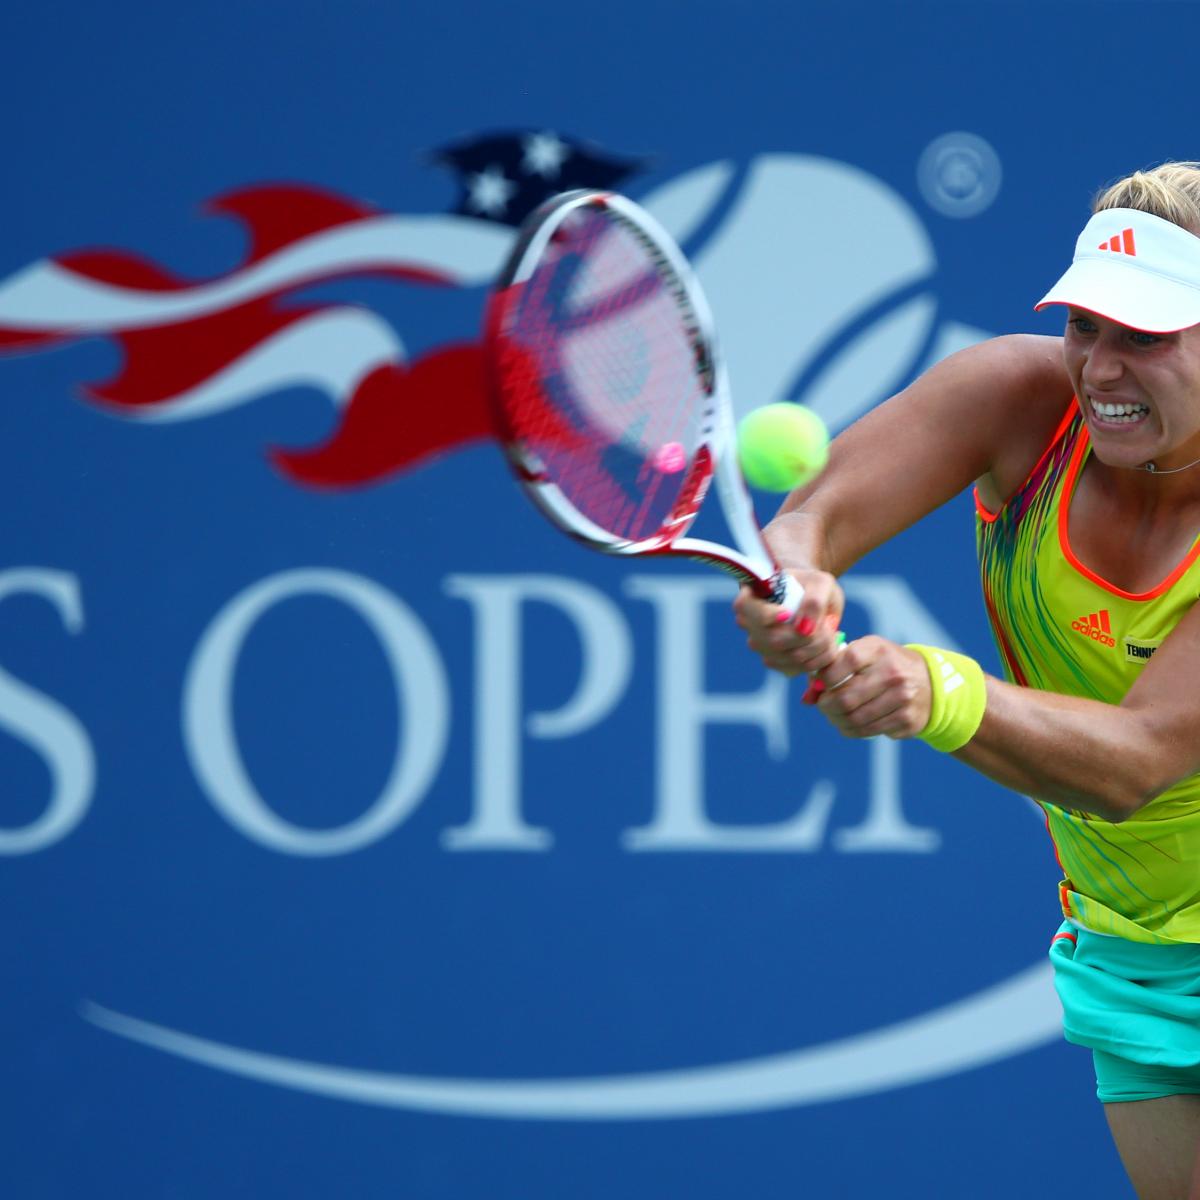 Angie Kerber at Top of Her Game, a Favorite to Win 2012 US Open | Bleacher Report ...